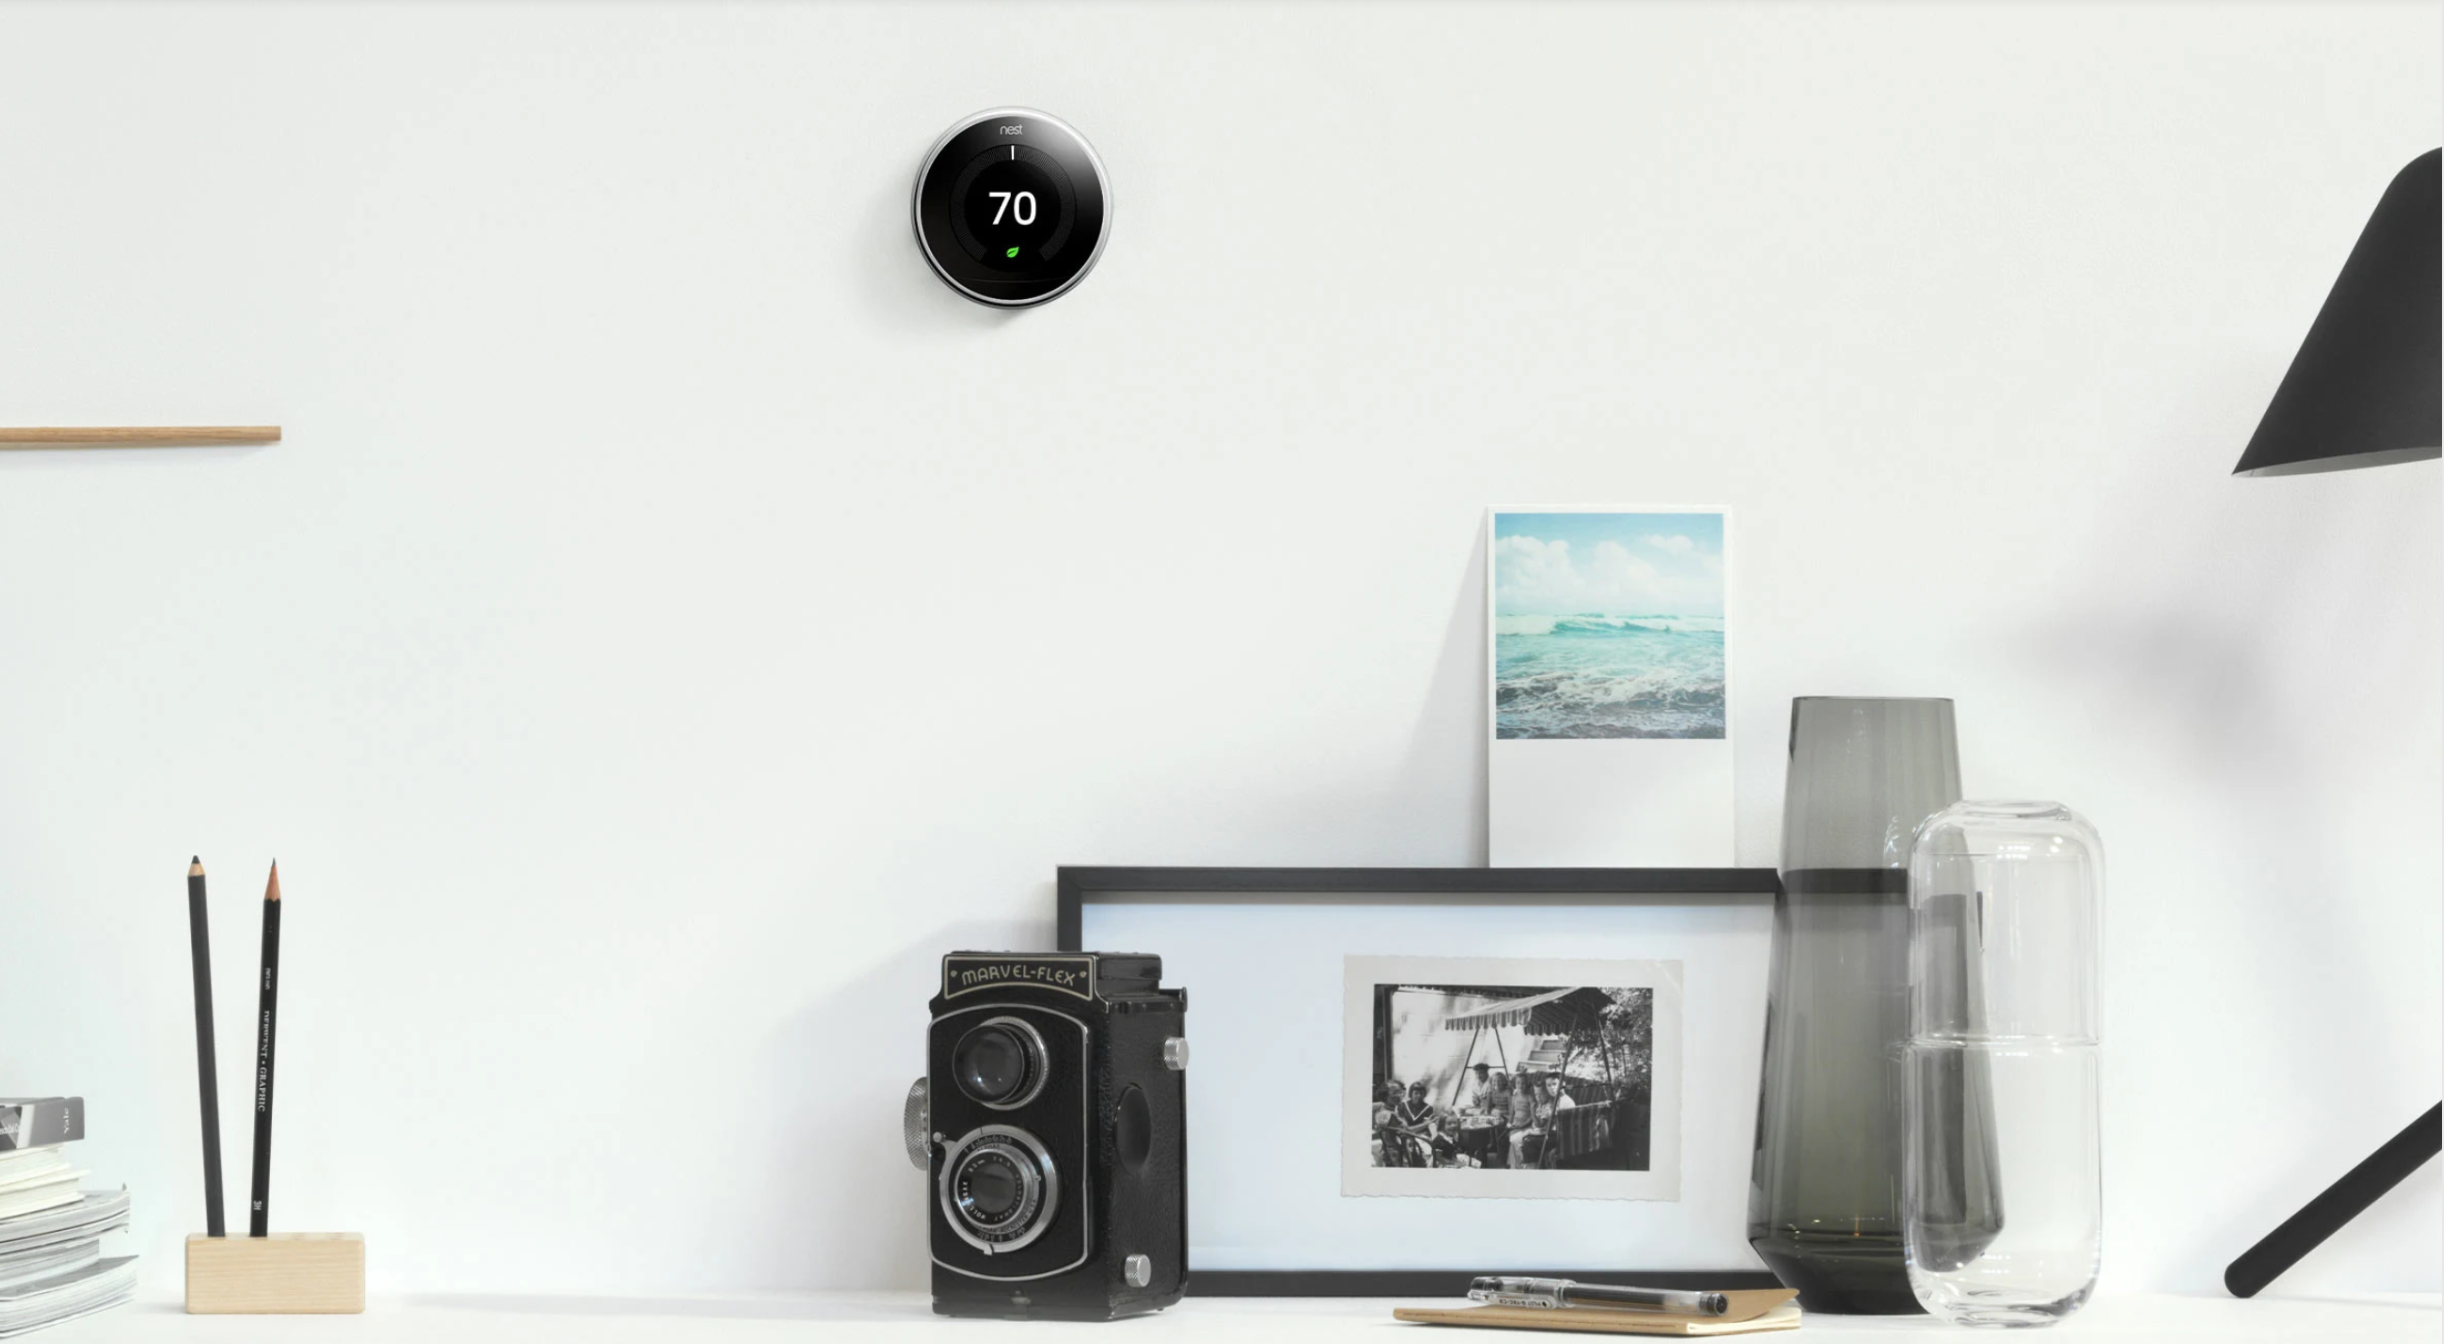 6 Gadgets That Will Make Your Home The Smartest Crib On The Block